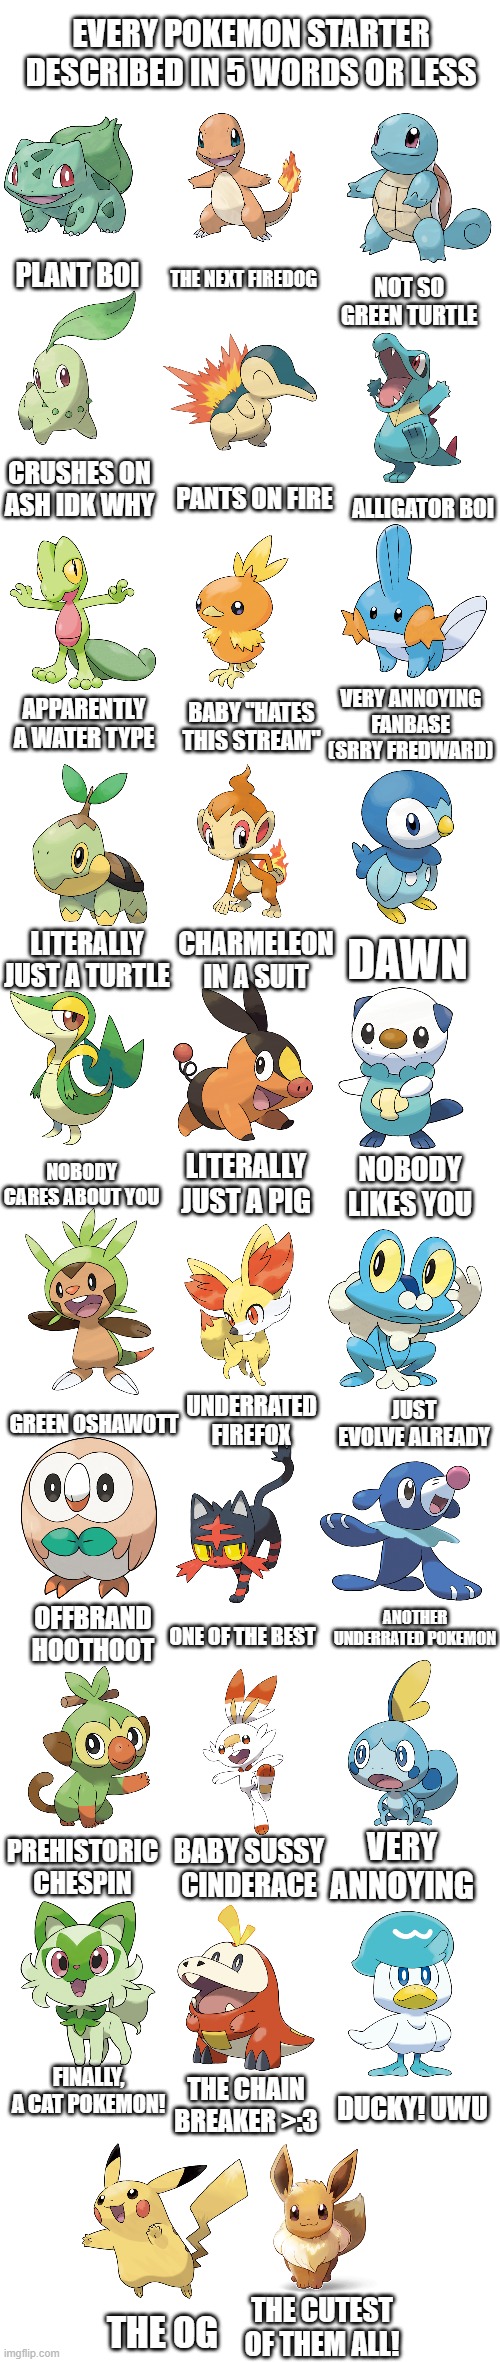 Whew! This took a while | EVERY POKEMON STARTER DESCRIBED IN 5 WORDS OR LESS; PLANT BOI; THE NEXT FIREDOG; NOT SO GREEN TURTLE; CRUSHES ON ASH IDK WHY; PANTS ON FIRE; ALLIGATOR BOI; VERY ANNOYING FANBASE (SRRY FREDWARD); BABY "HATES THIS STREAM"; APPARENTLY A WATER TYPE; LITERALLY JUST A TURTLE; CHARMELEON IN A SUIT; DAWN; NOBODY CARES ABOUT YOU; LITERALLY JUST A PIG; NOBODY LIKES YOU; JUST EVOLVE ALREADY; UNDERRATED FIREFOX; GREEN OSHAWOTT; ANOTHER UNDERRATED POKEMON; OFFBRAND HOOTHOOT; ONE OF THE BEST; VERY ANNOYING; BABY SUSSY CINDERACE; PREHISTORIC CHESPIN; FINALLY, A CAT POKEMON! DUCKY! UWU; THE CHAIN BREAKER >:3; THE CUTEST OF THEM ALL! THE OG | image tagged in long blank white template,memes,pokemon,starters,blank starter pack,why are you reading this | made w/ Imgflip meme maker